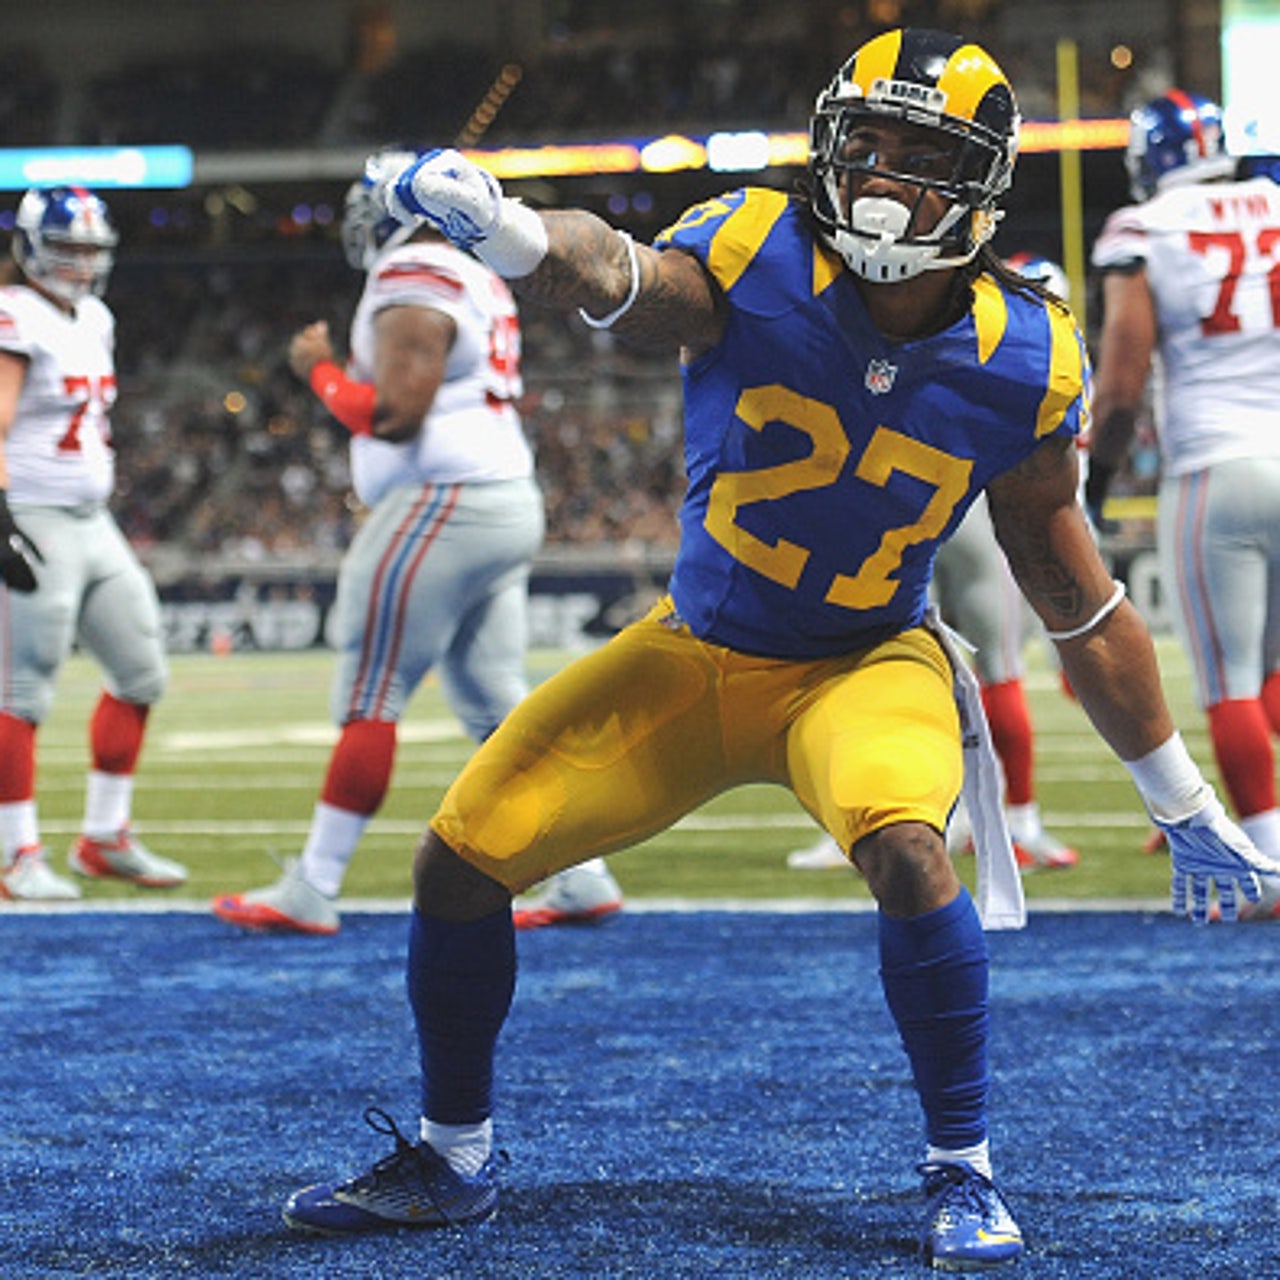 Rams running backs: Todd Gurley is a young star, Tre Mason's